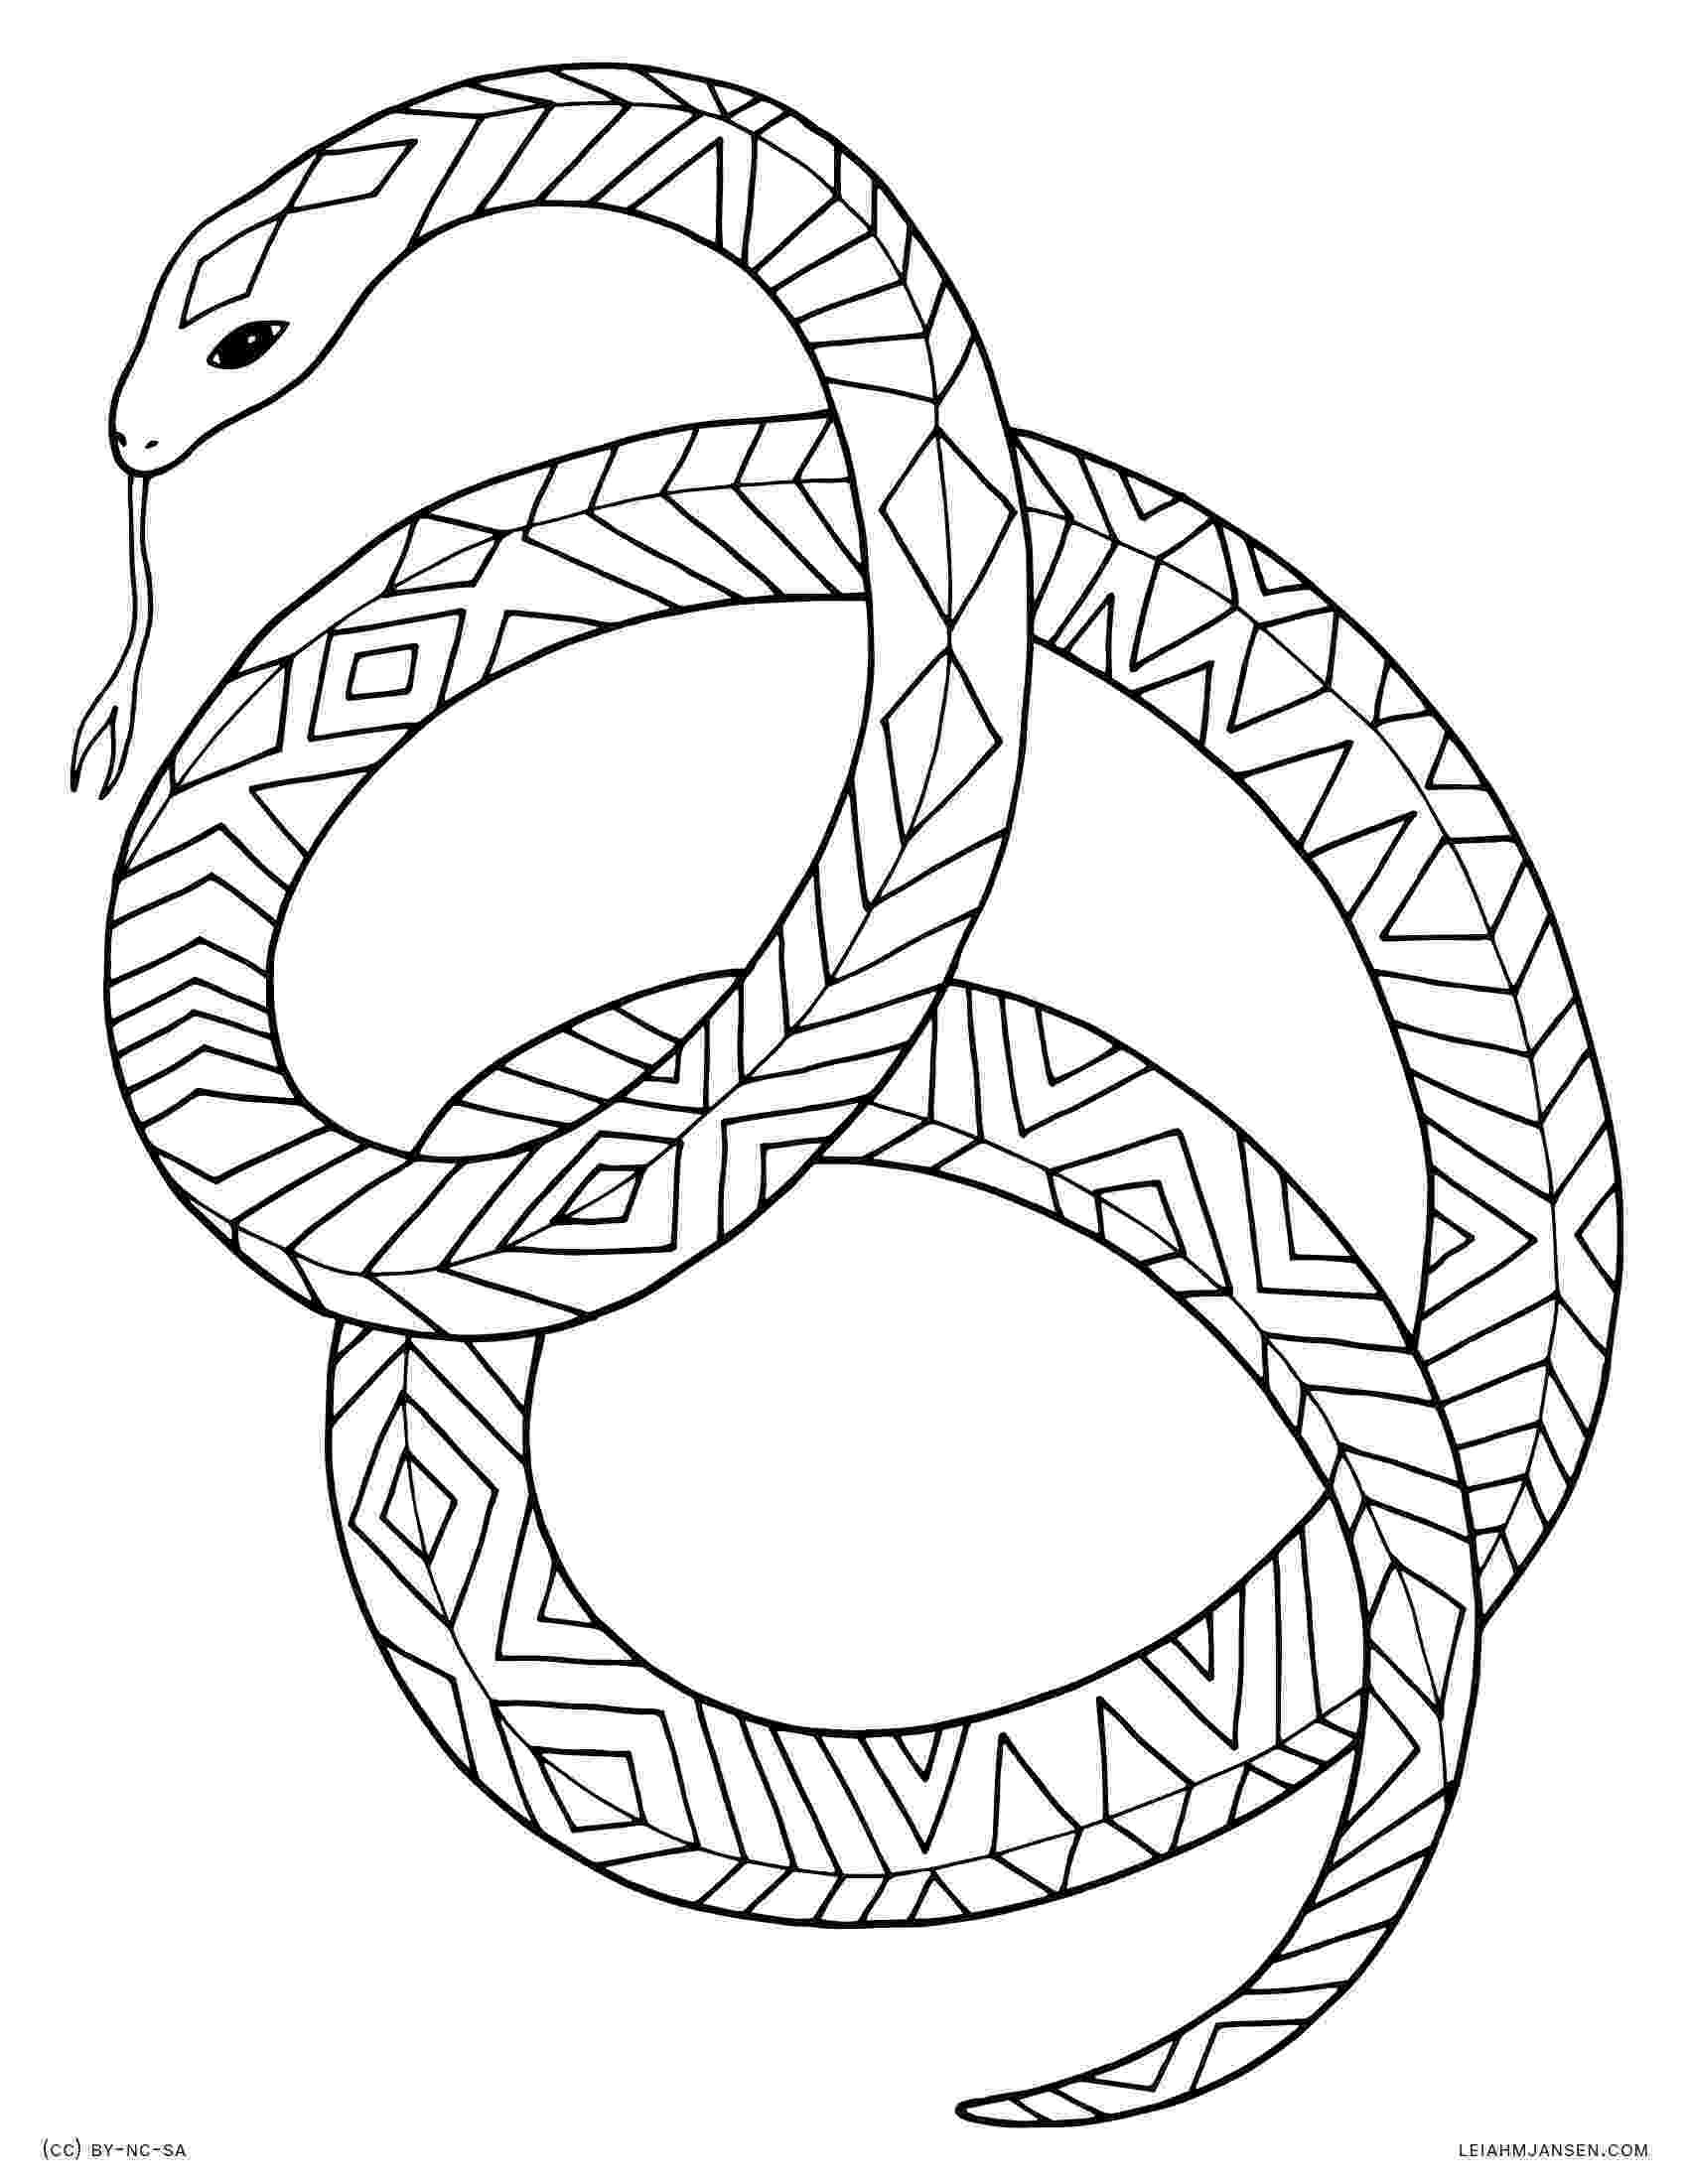 snake coloring sheet snake coloring pages free for children sheet coloring snake 